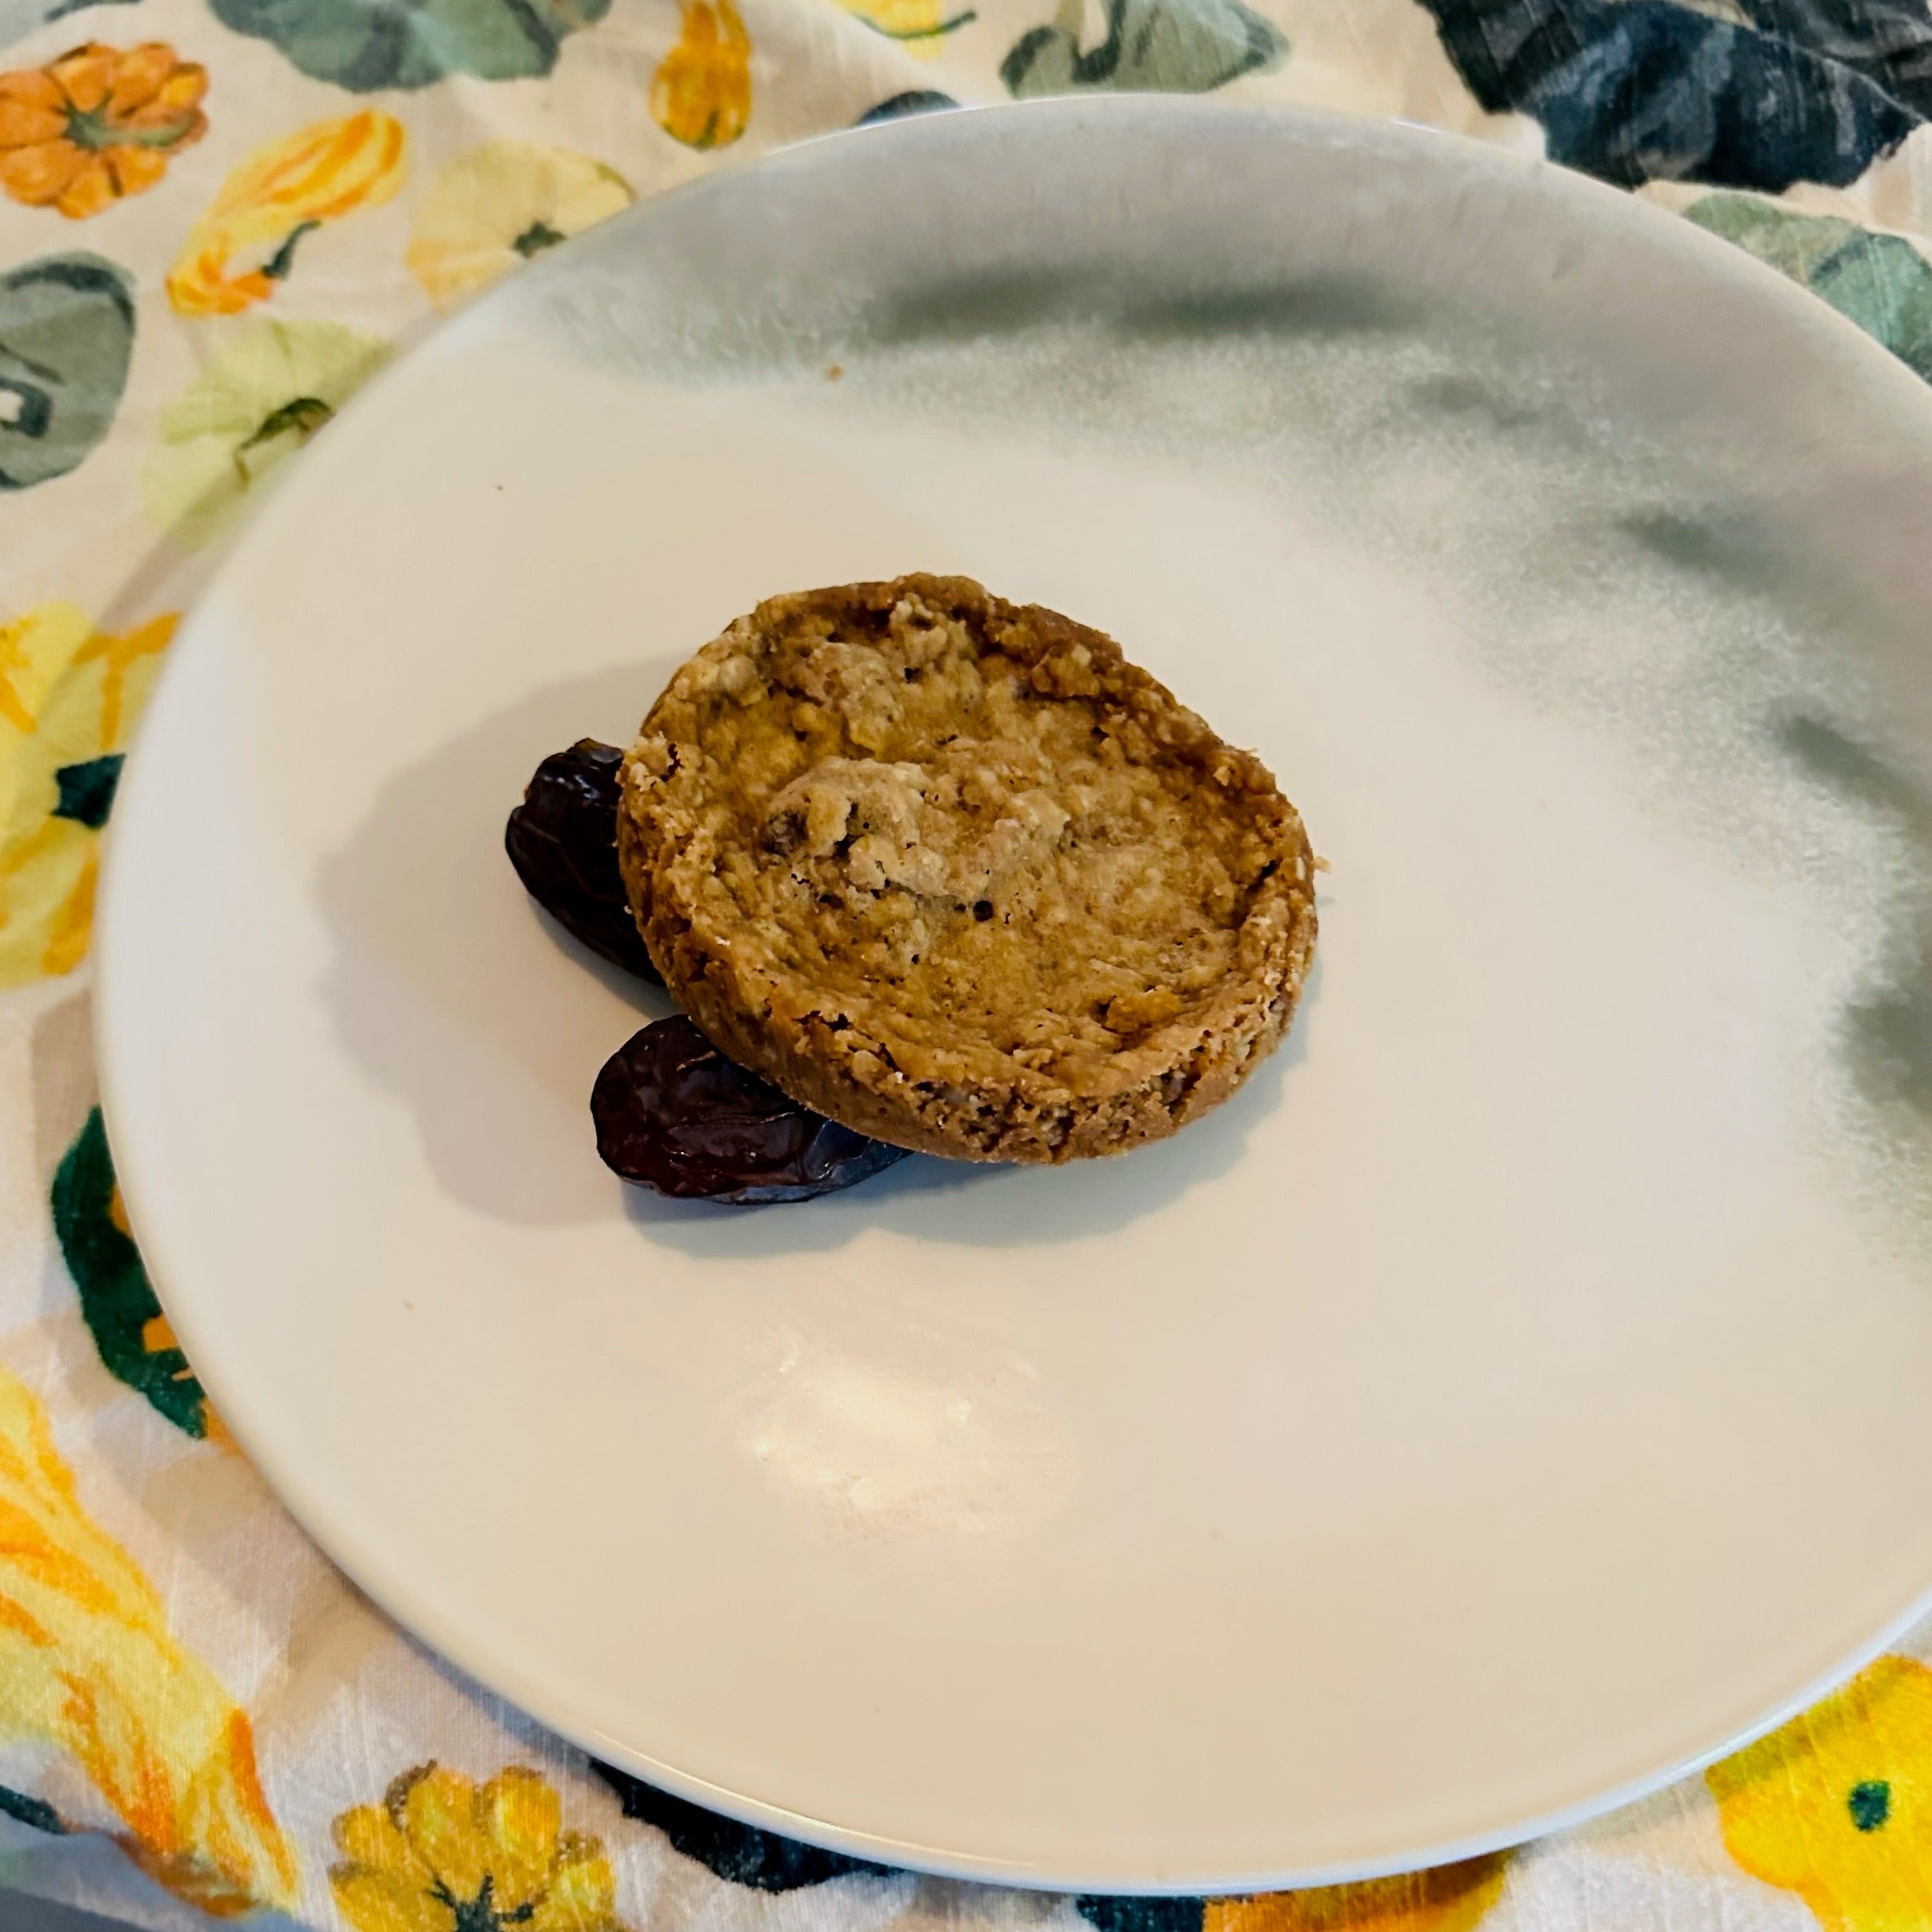 Coyote Kitchen: V/GF Cookies - $6 - The Local Y'all